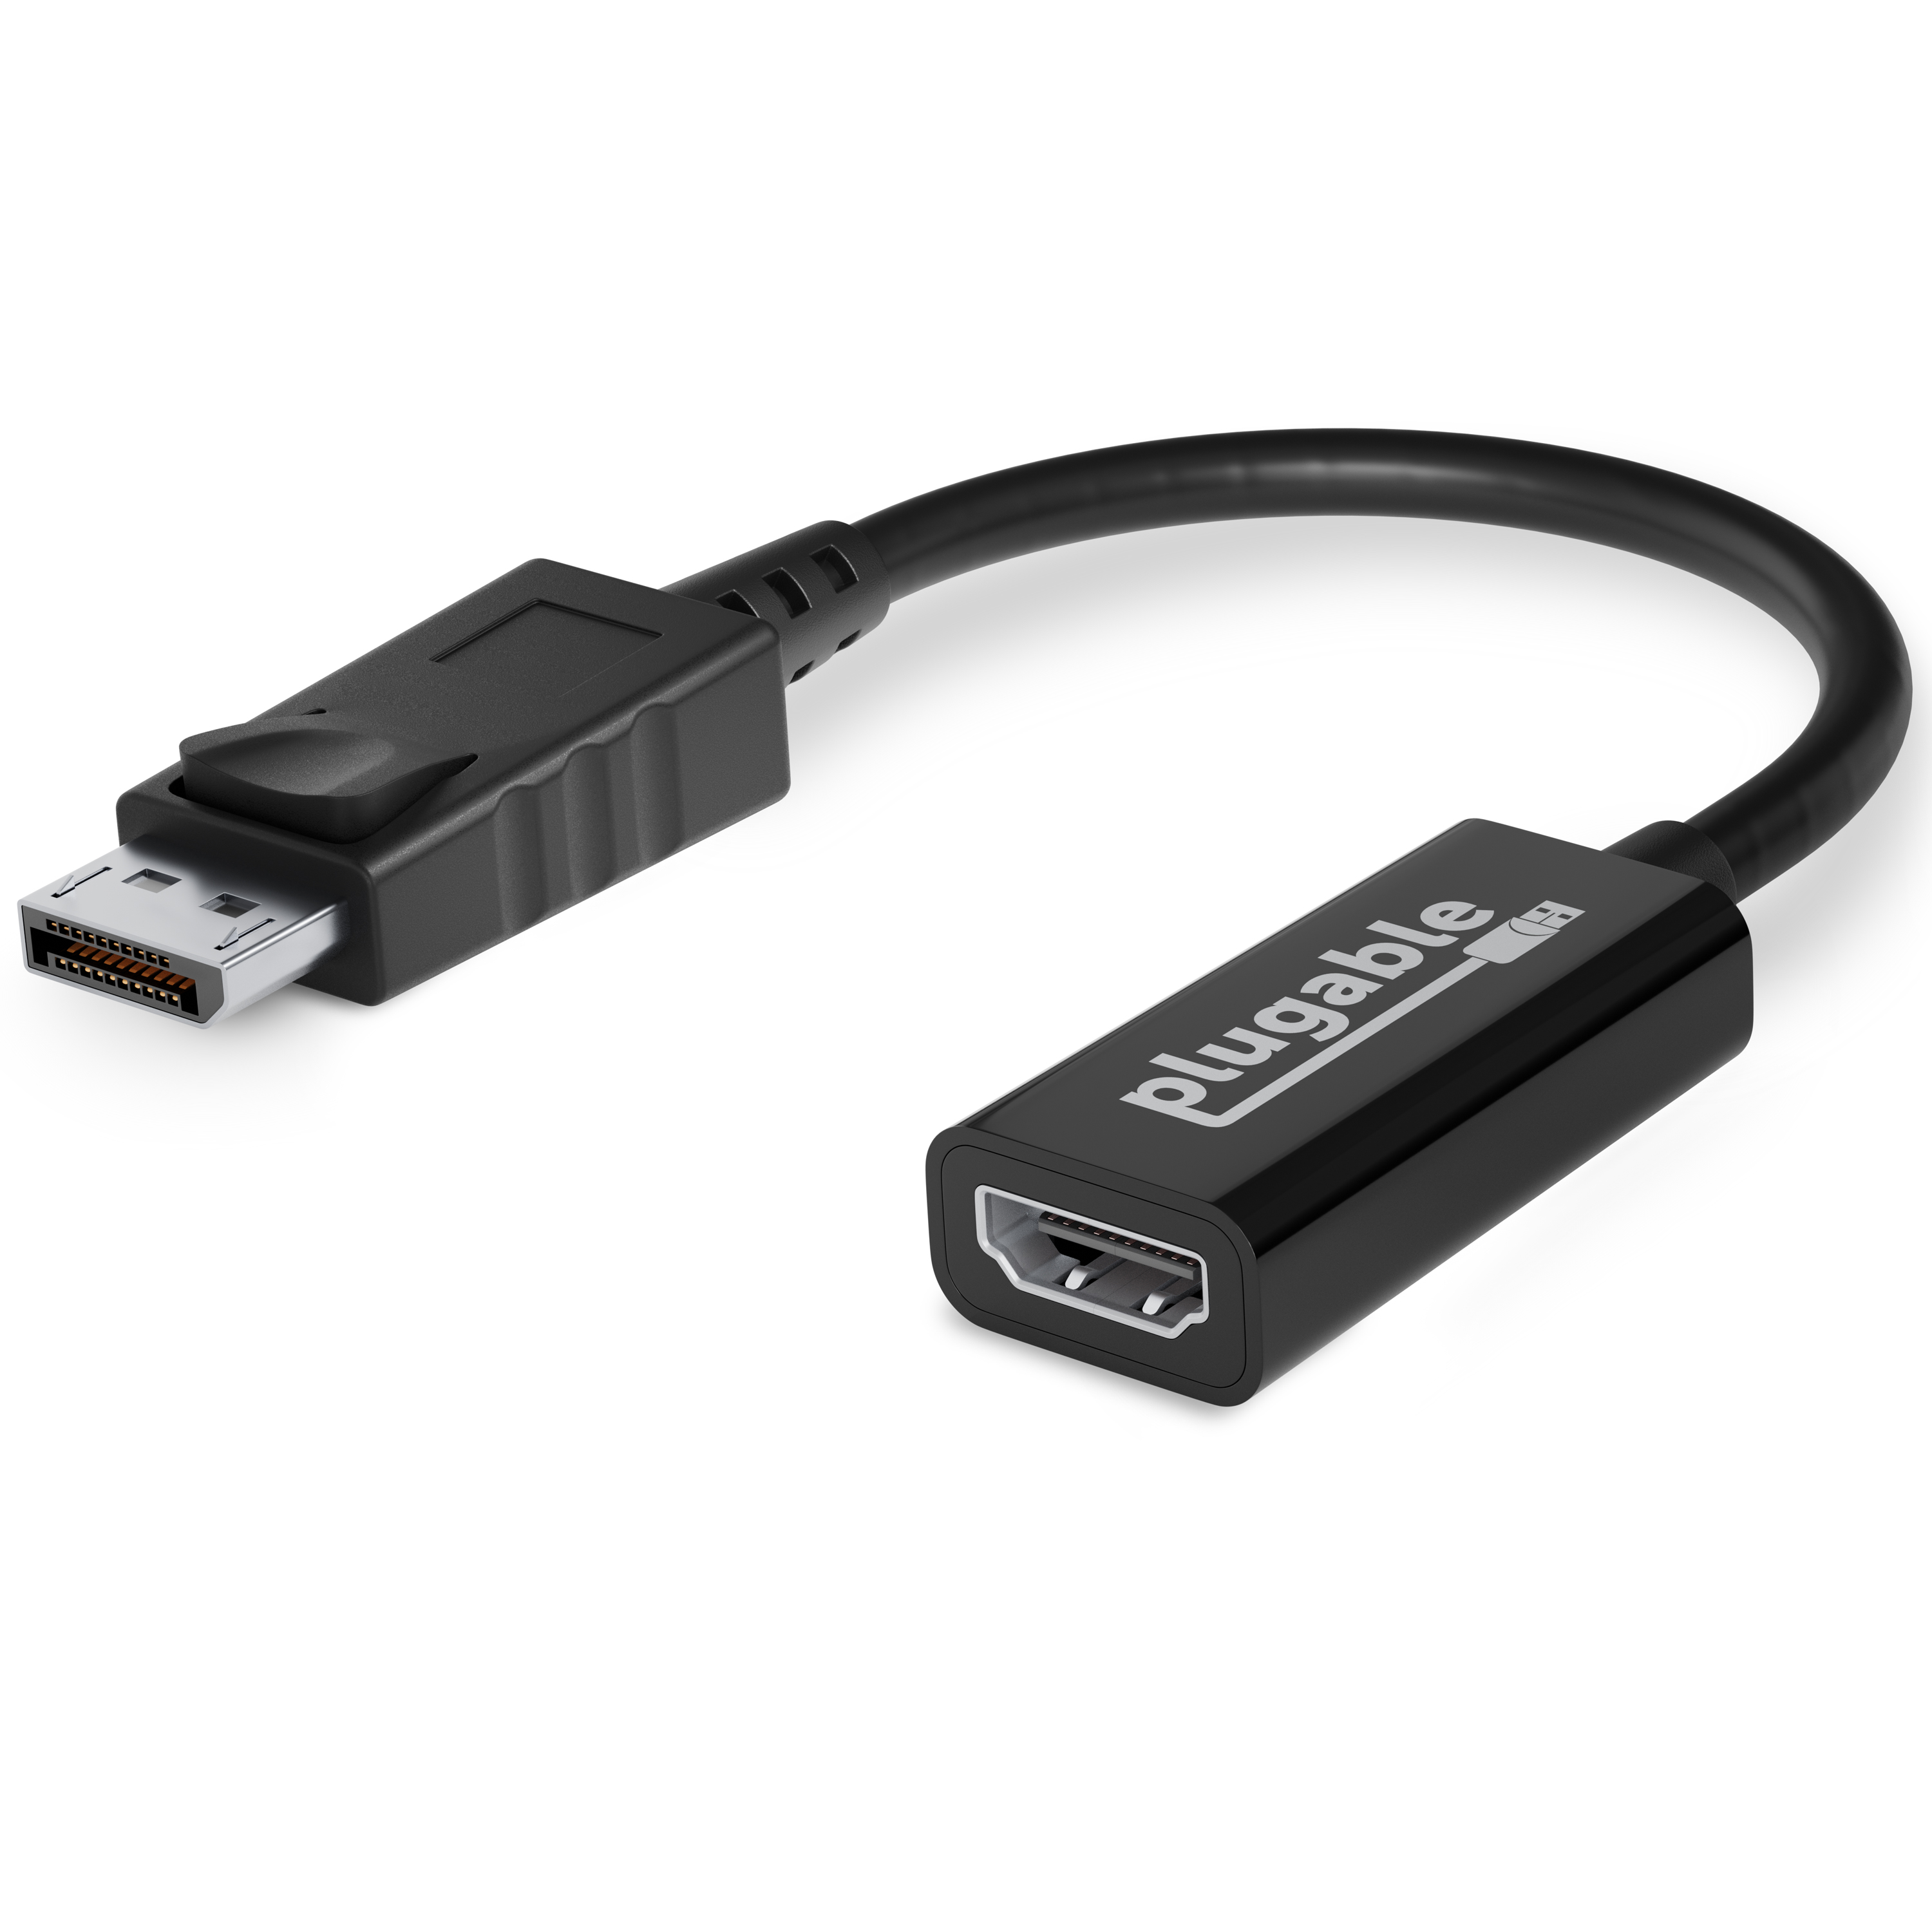 Plugable Active DisplayPort to HDMI Adapter - Connect any DisplayPort-Enabled PC or Tablet to an HDMI Enabled Monitor, TV or Projector for Ultra-HD Video Streaming (HDMI 2.0 up to 4K 3840x2160 @60Hz) - image 1 of 6